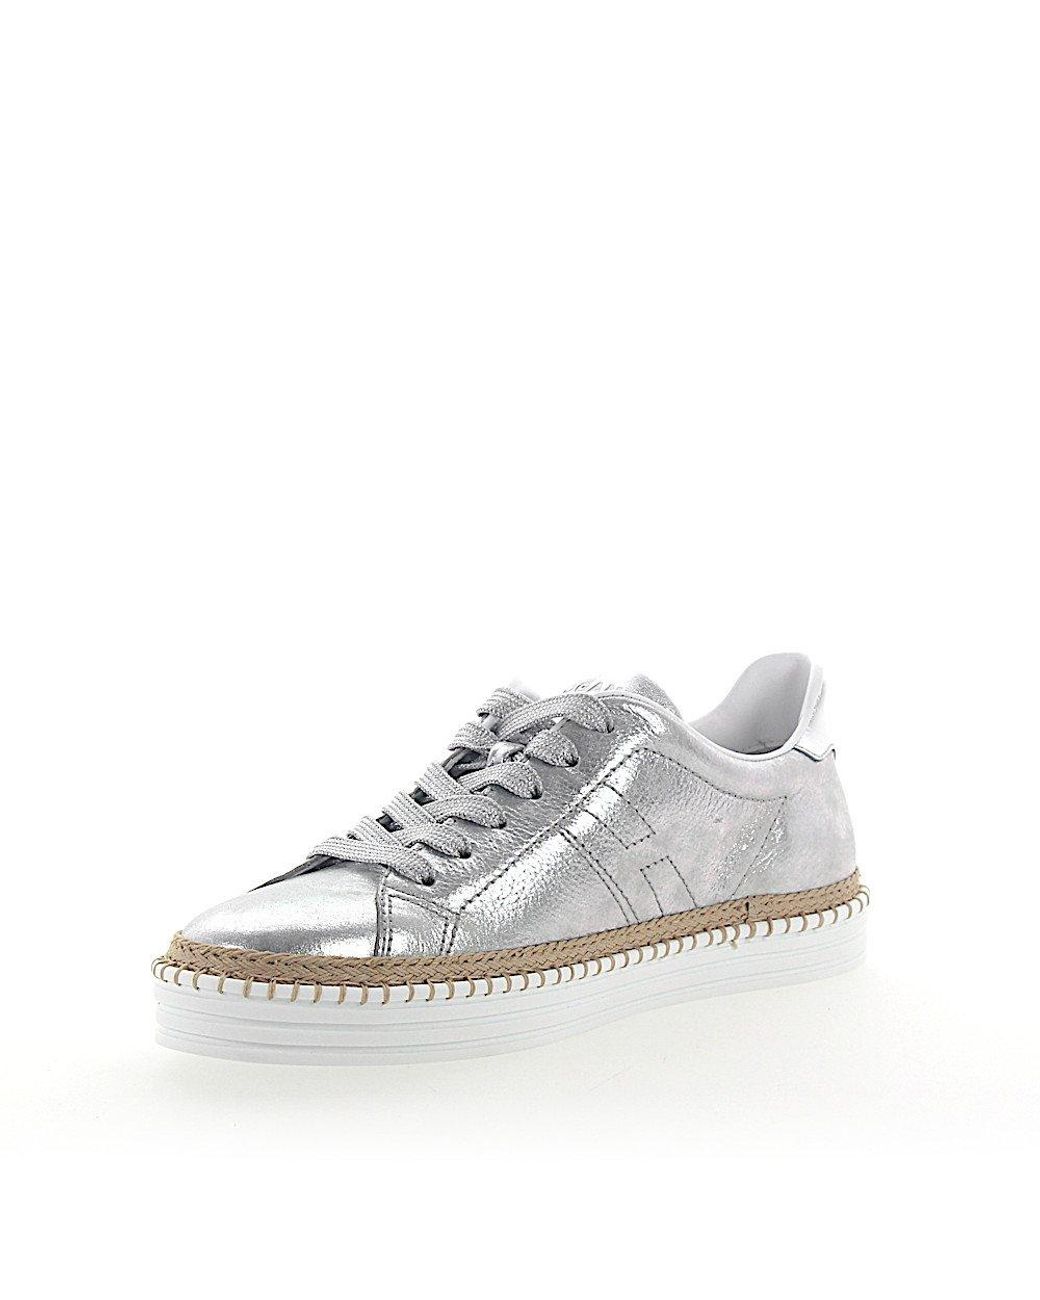 Hogan Sneakers R260 Leather Metallic Silver Finished | Lyst